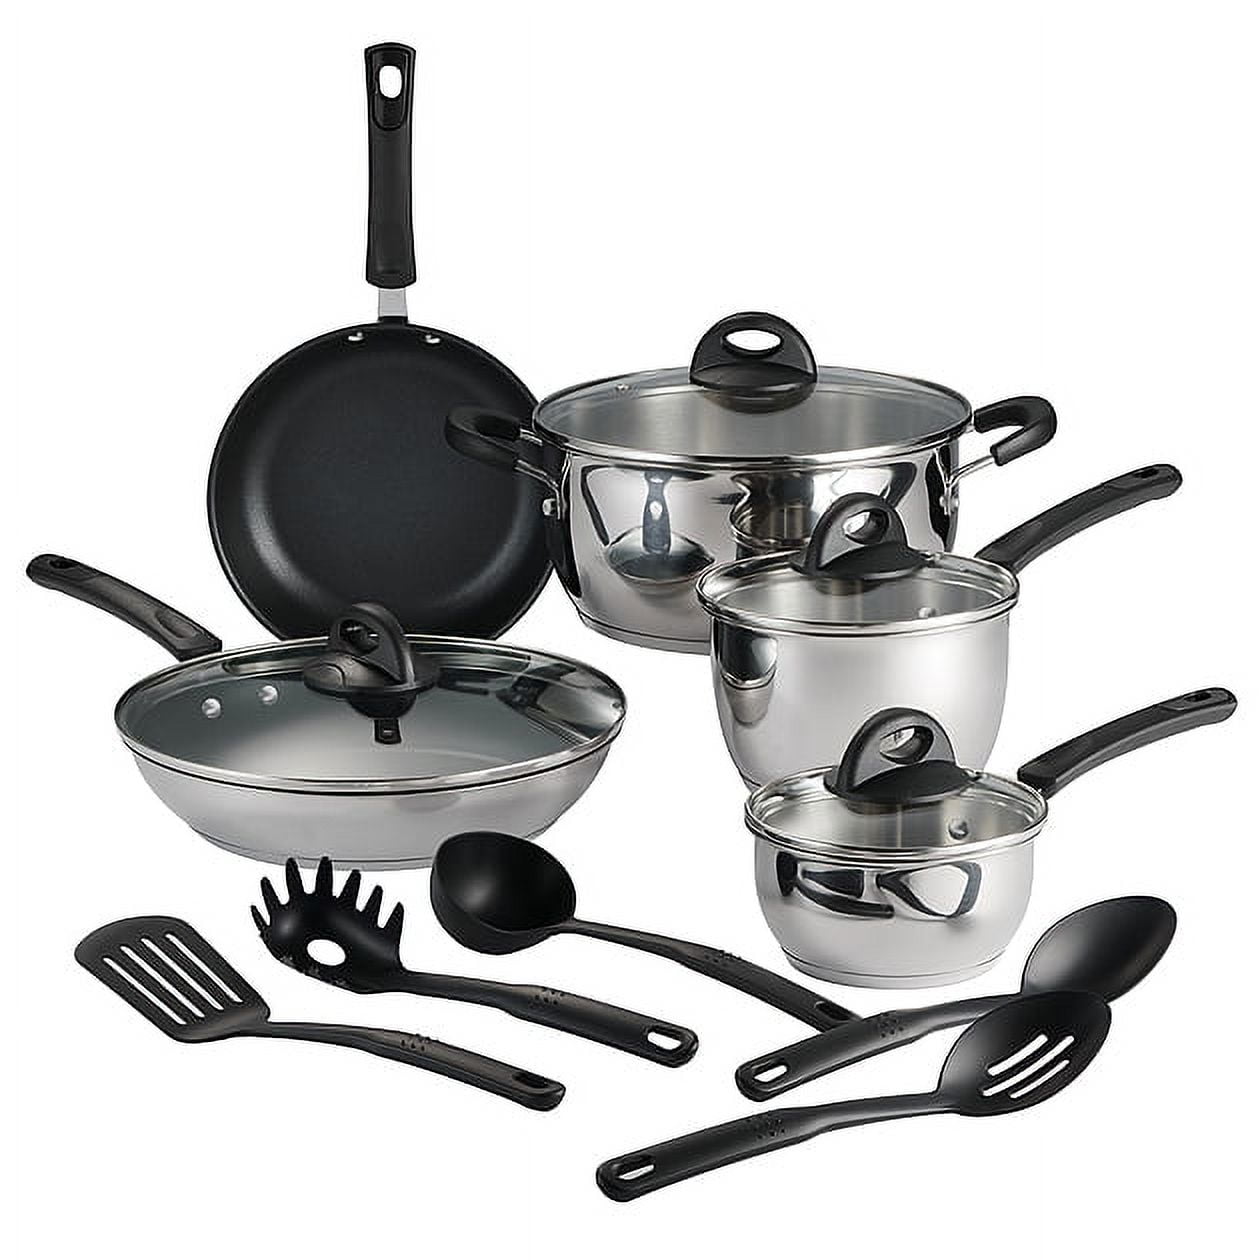 Tramontina 14-Piece Tri-Ply Clad 18/10 Stainless Steel Cookware Set